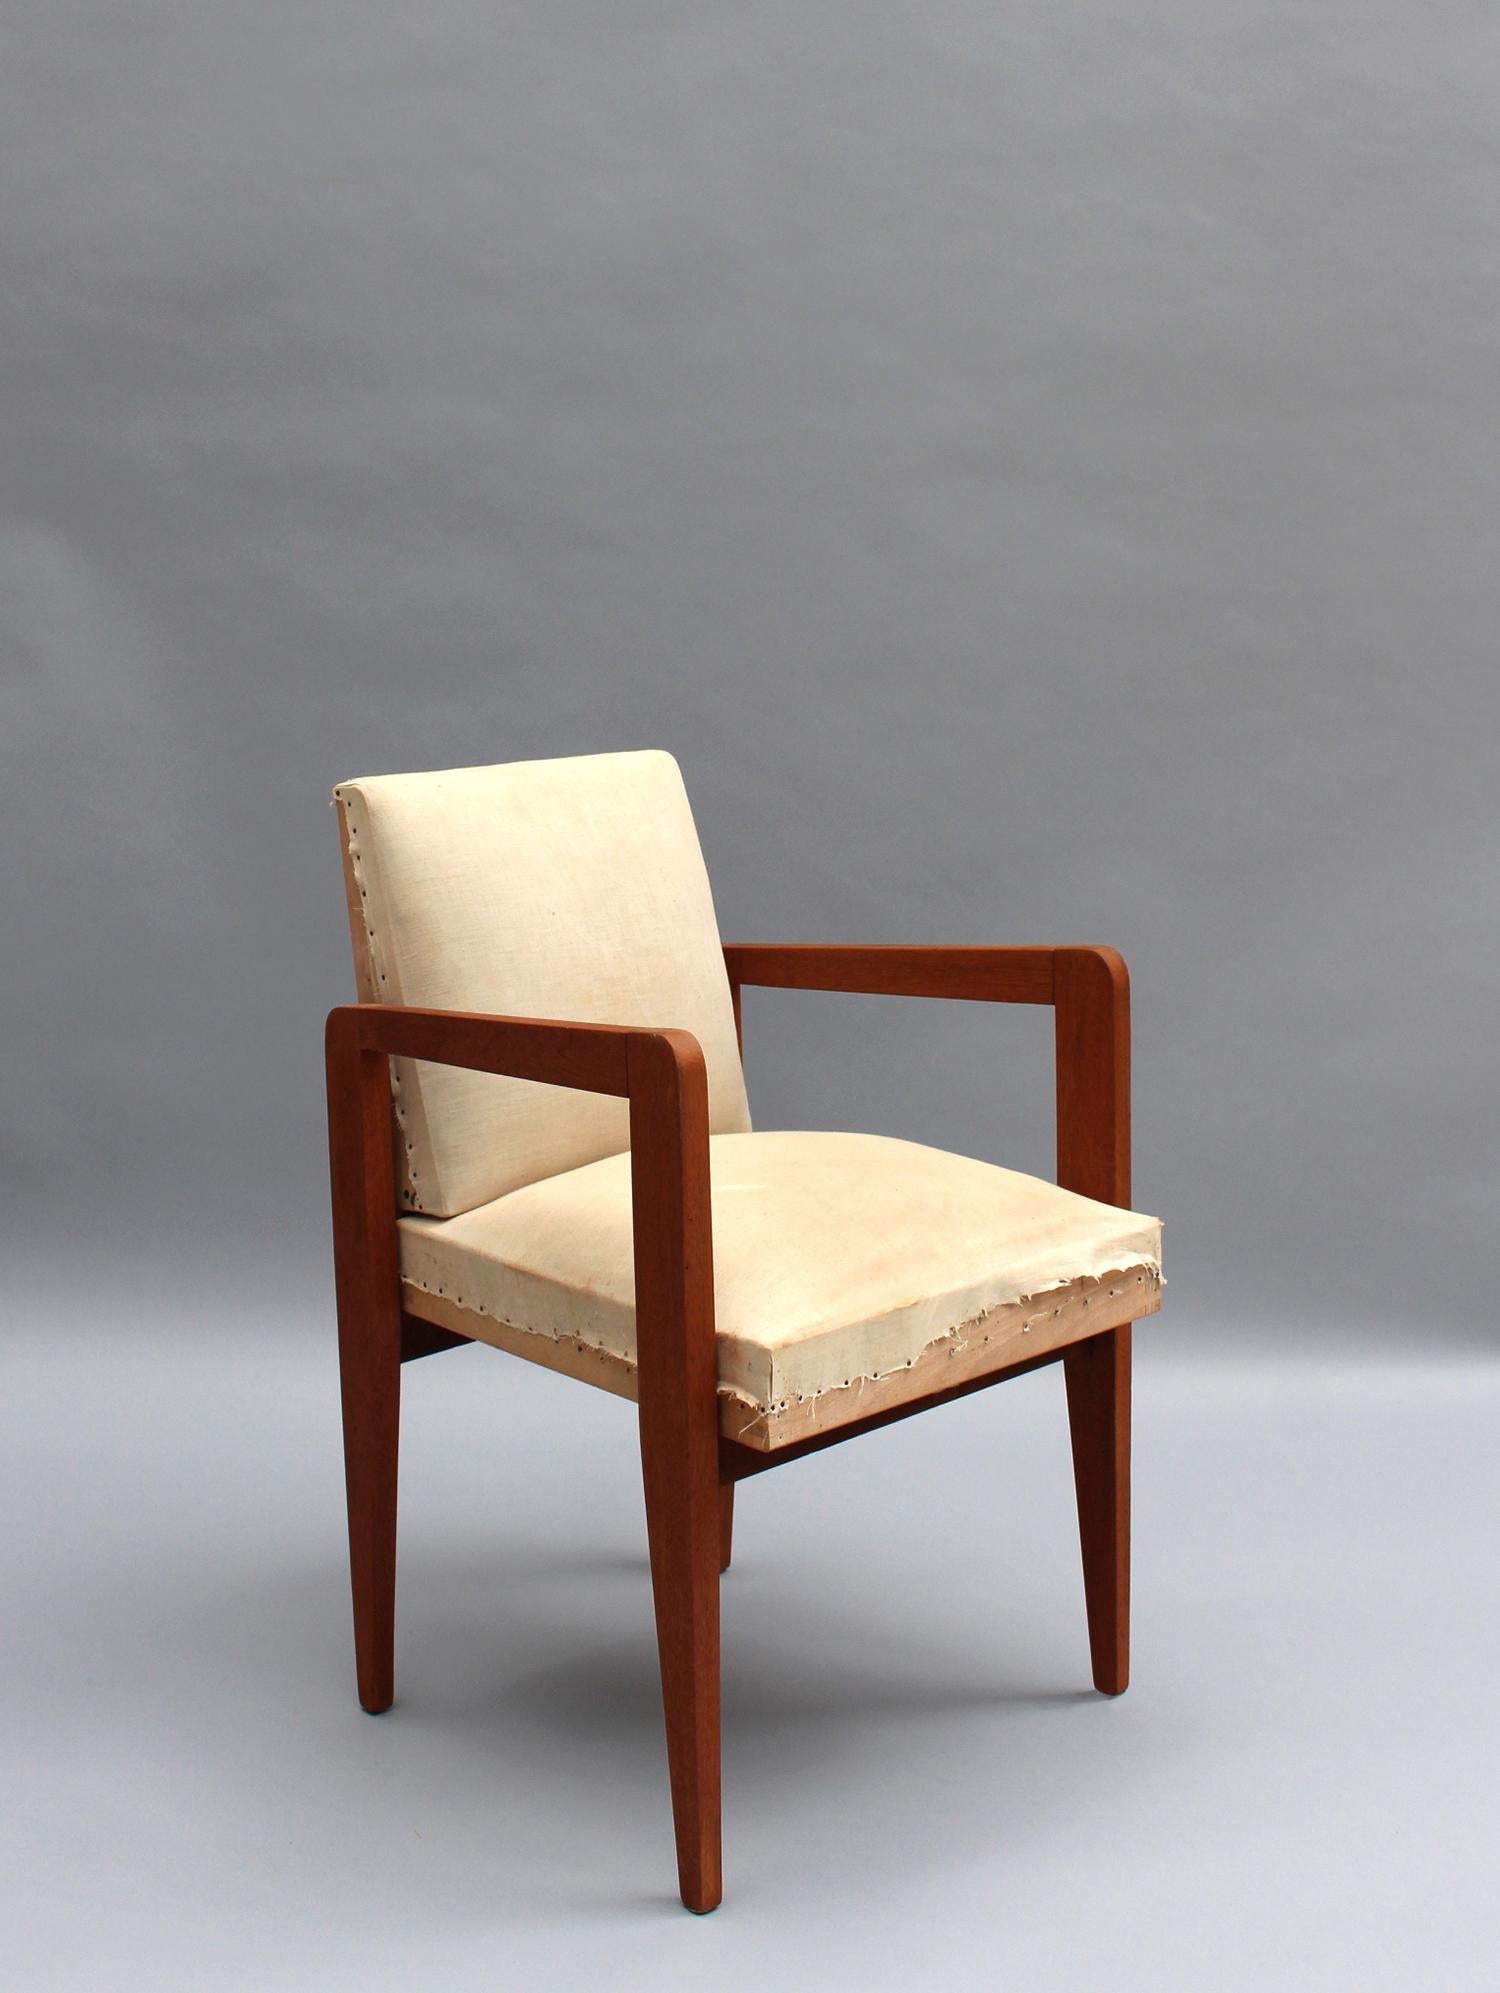 Fine French Art Deco Mahogany Arm Chair In Good Condition For Sale In Long Island City, NY